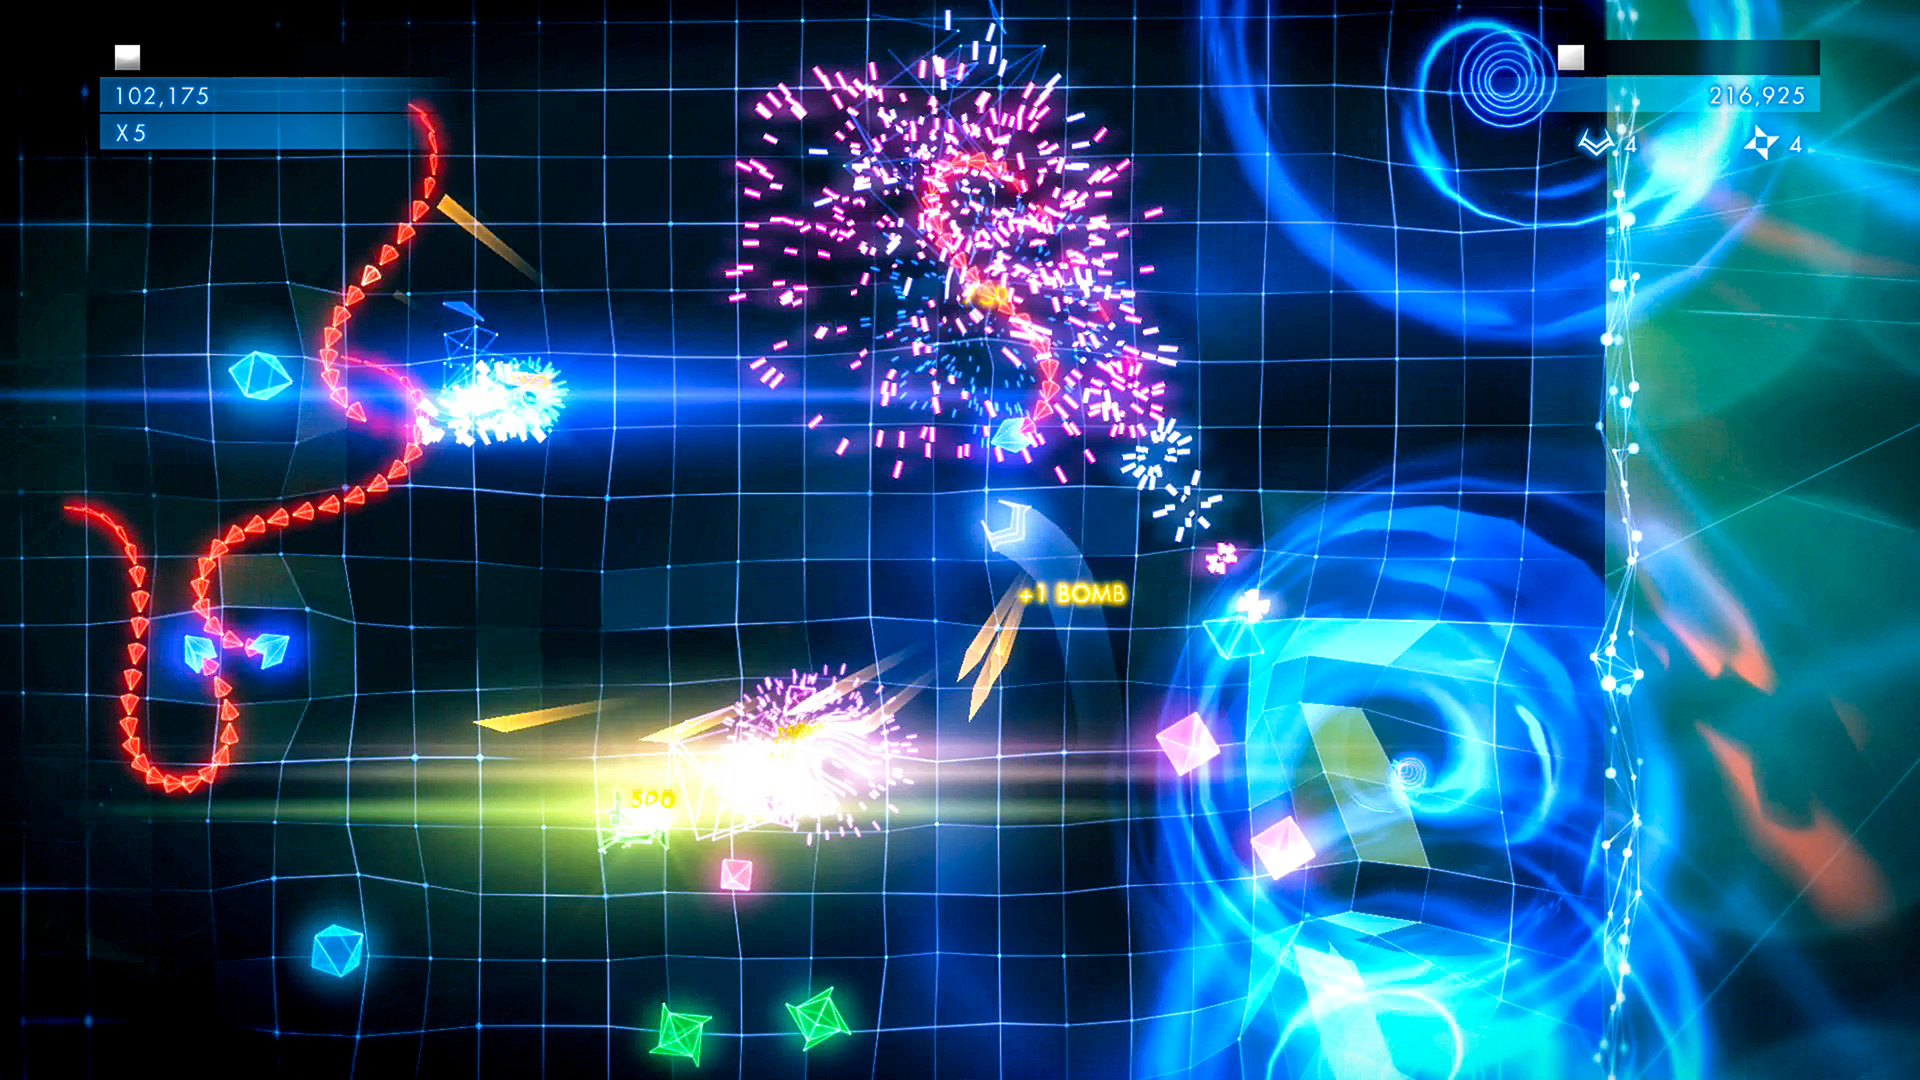 geometry wars 3 dimensions evolved trophy guide